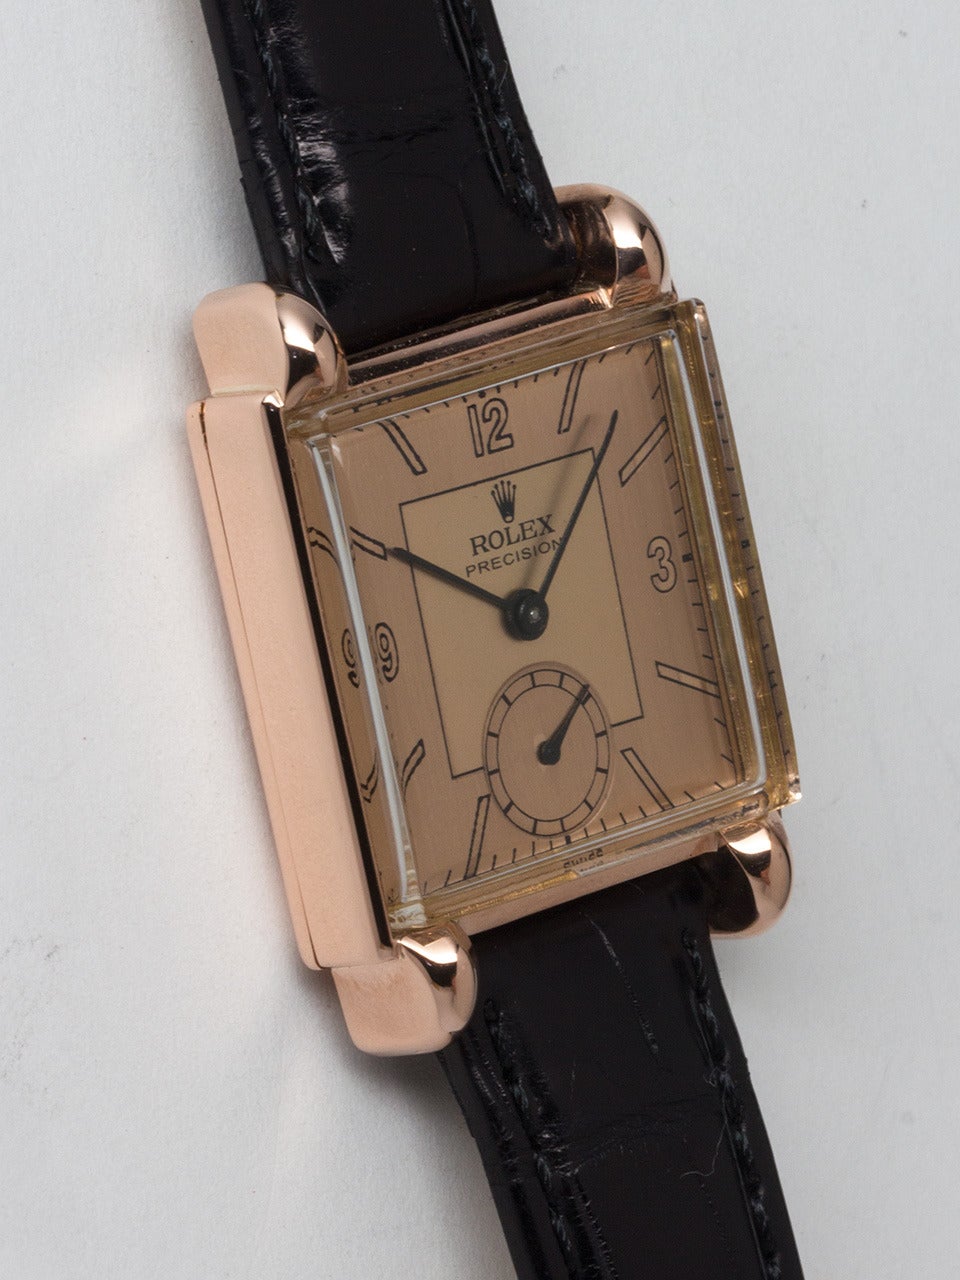 Rolex 14K Rose Gold Square Dress Wristwatch circa 1940s. Square case measuring 26 x 35mm with horn lugs. Beautifully restored 2 tone salmon dial with mirror figures and baton hands. Powered by 17 jewel manual wind caliber 10 1/2 H movement with